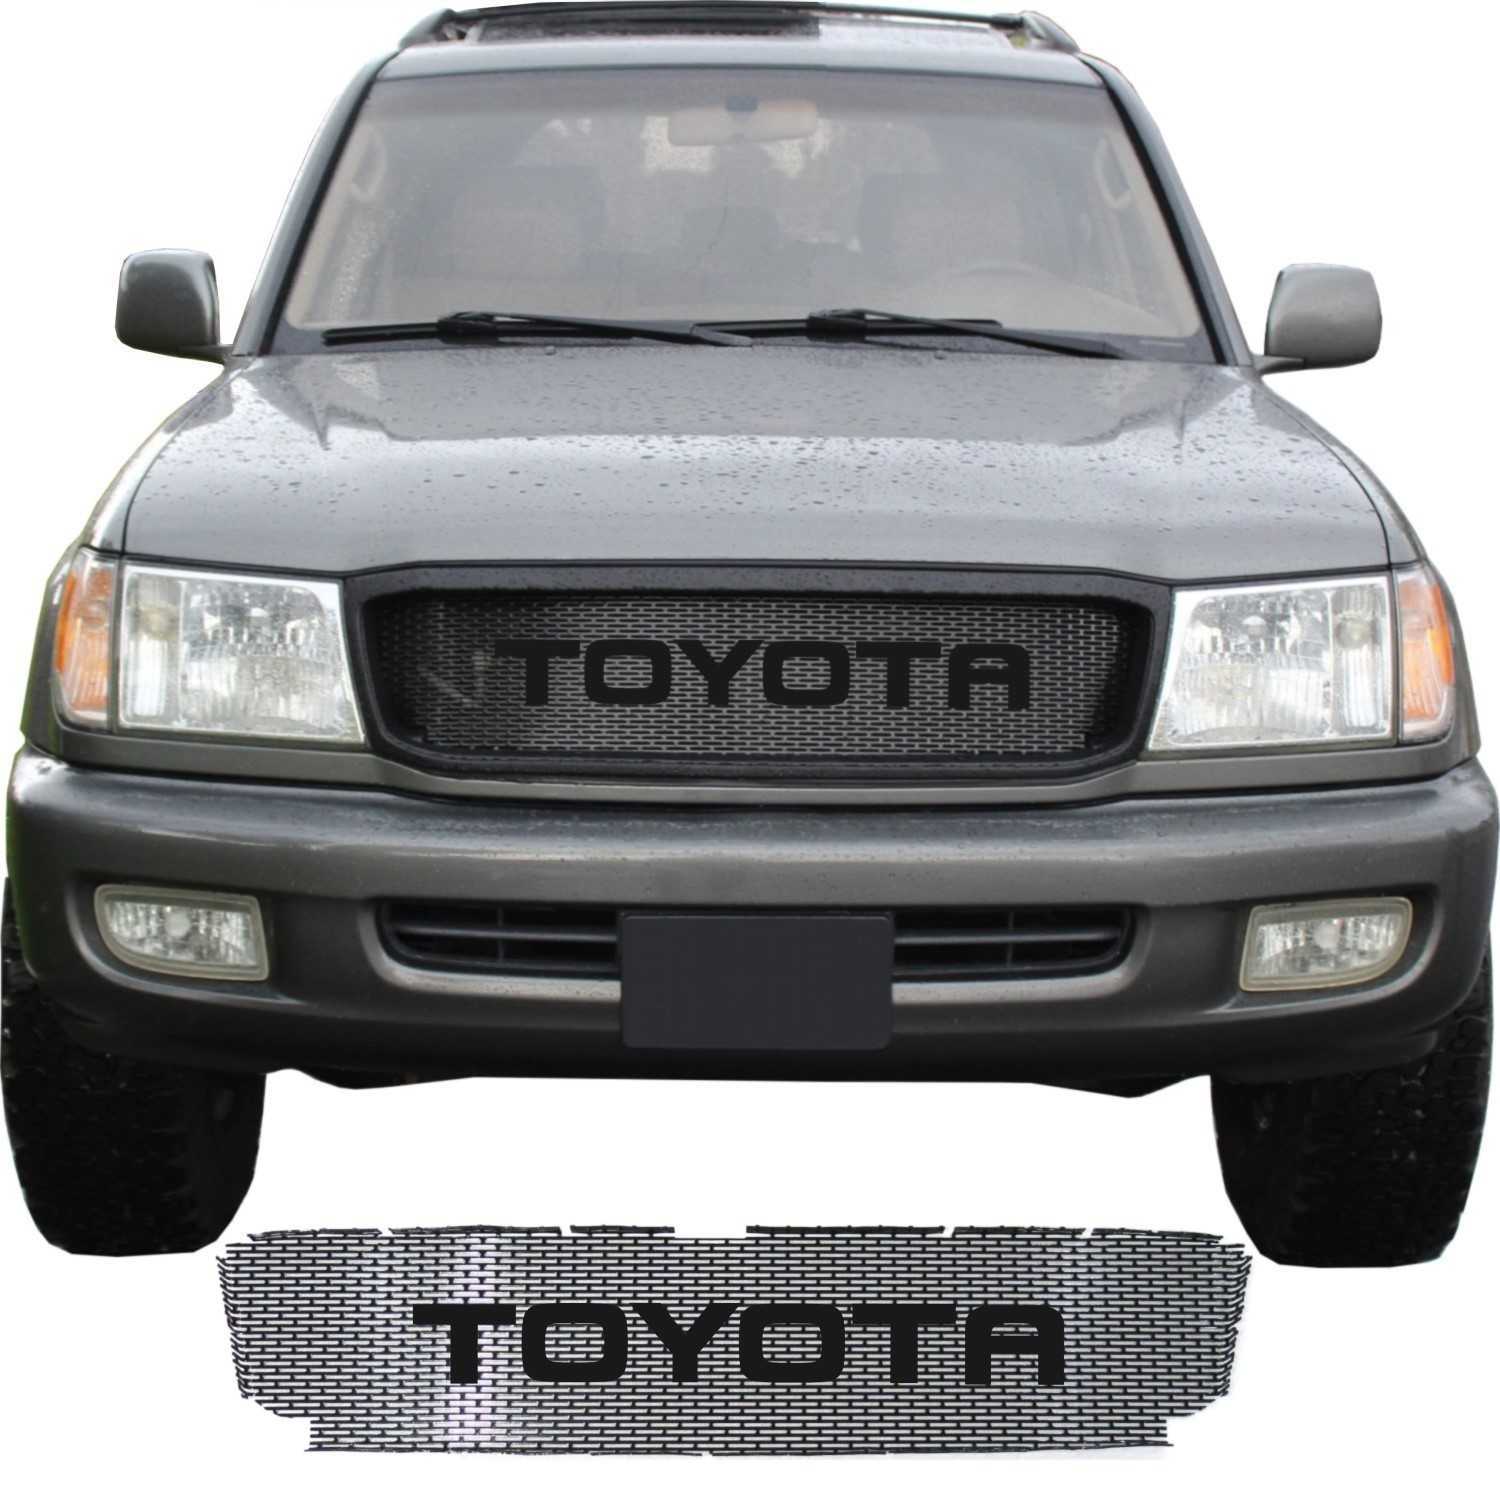 1998 - 2002 Toyota Land Cruiser Series 100 Grill Mesh and Big Letters